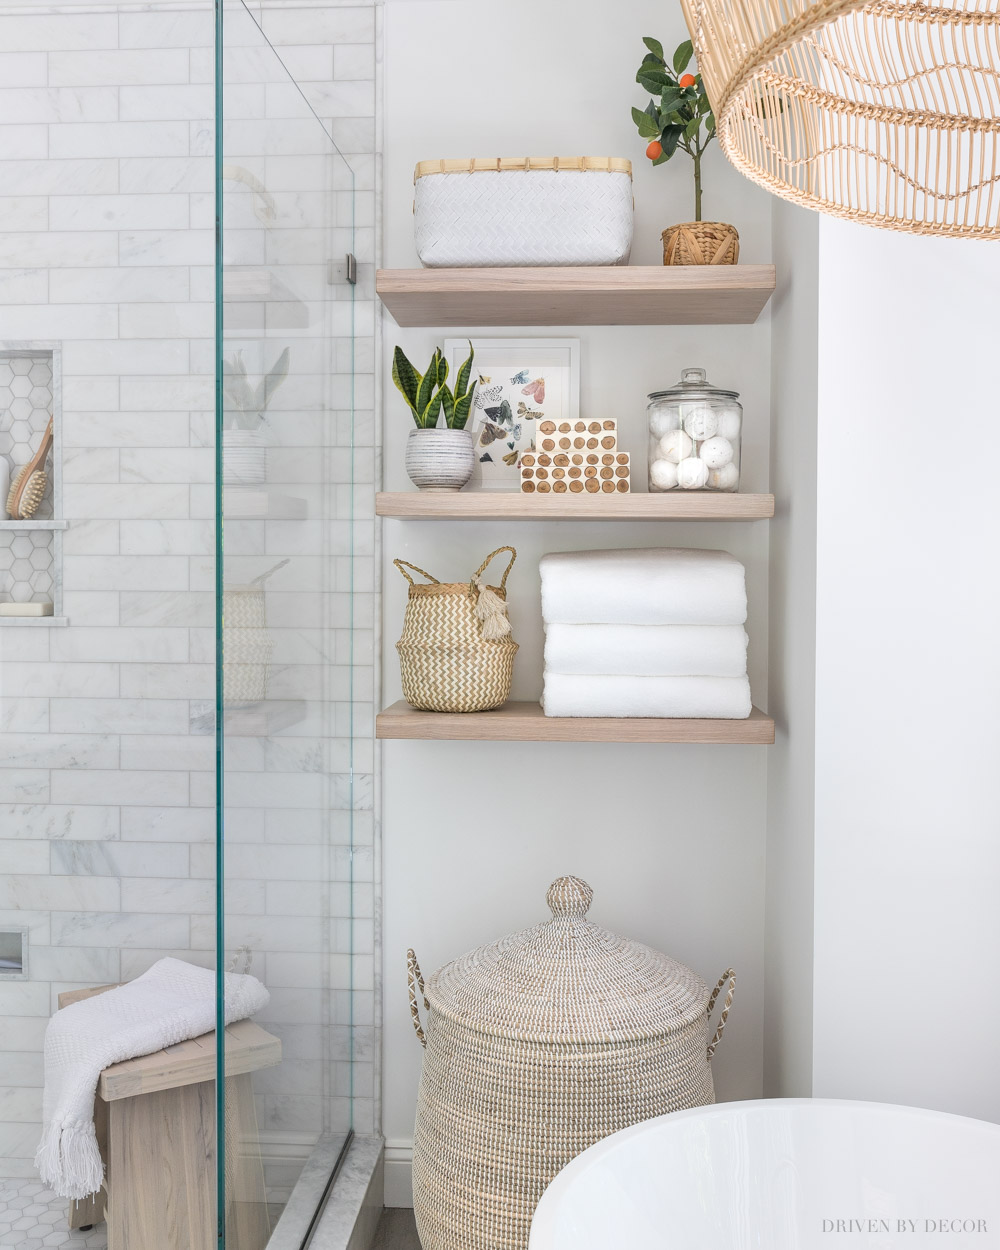 DIY Bathroom Shelves Offer Stylish Storage For Tight Spaces